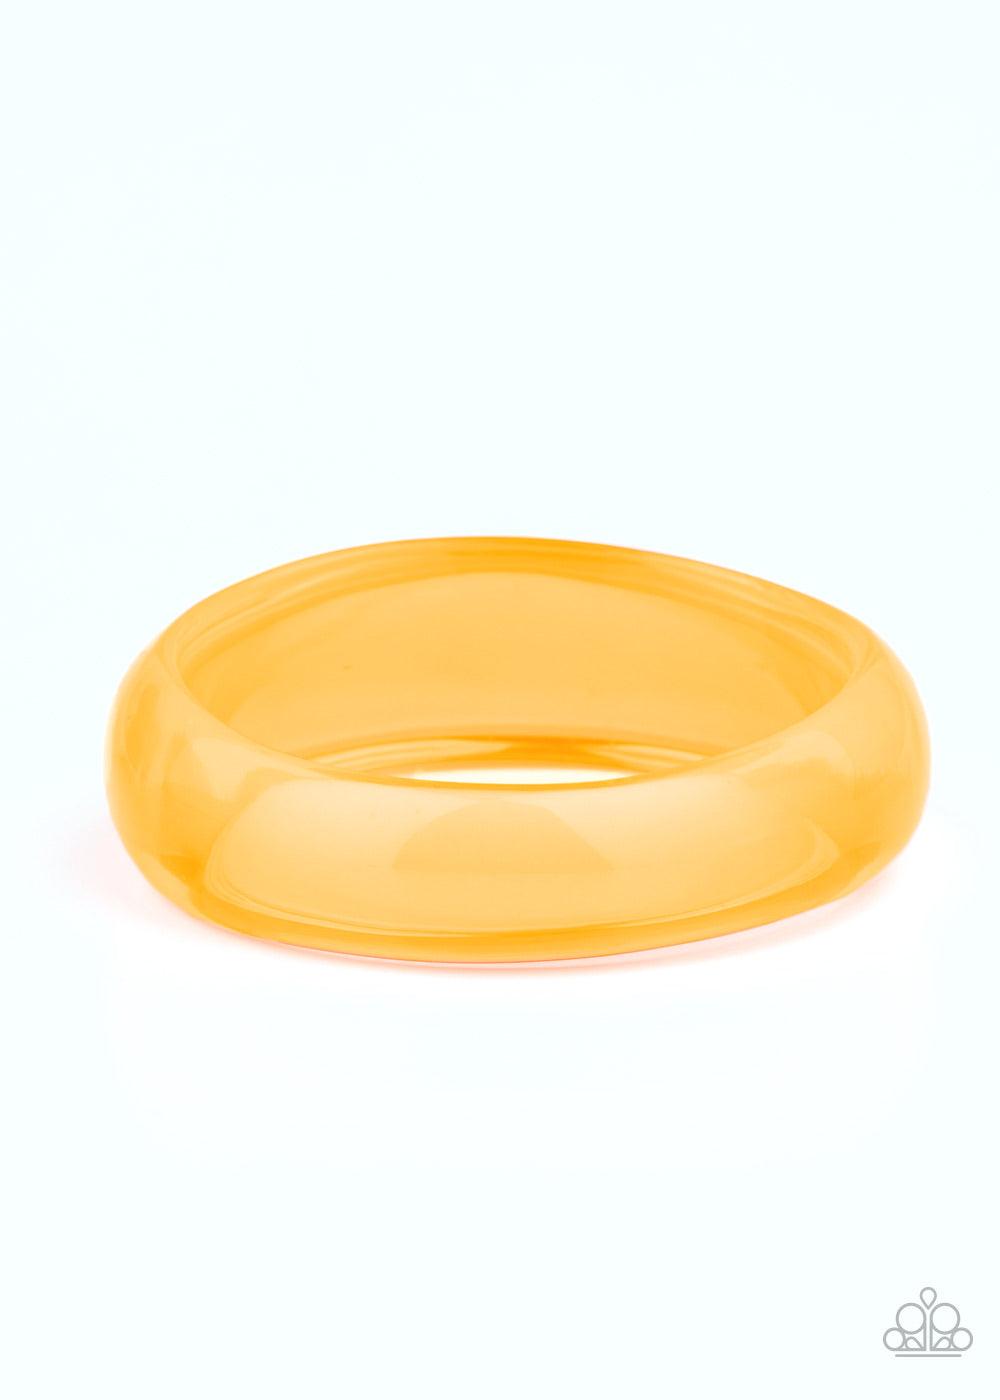 Paparazzi Accessories Major Material Girl - Orange A neon orange acrylic bangle slides along the wrist for a colorfully retro flair. The shiny bangle gradually widens at the top for a fabulous finish. Sold as one individual bracelet. Jewelry